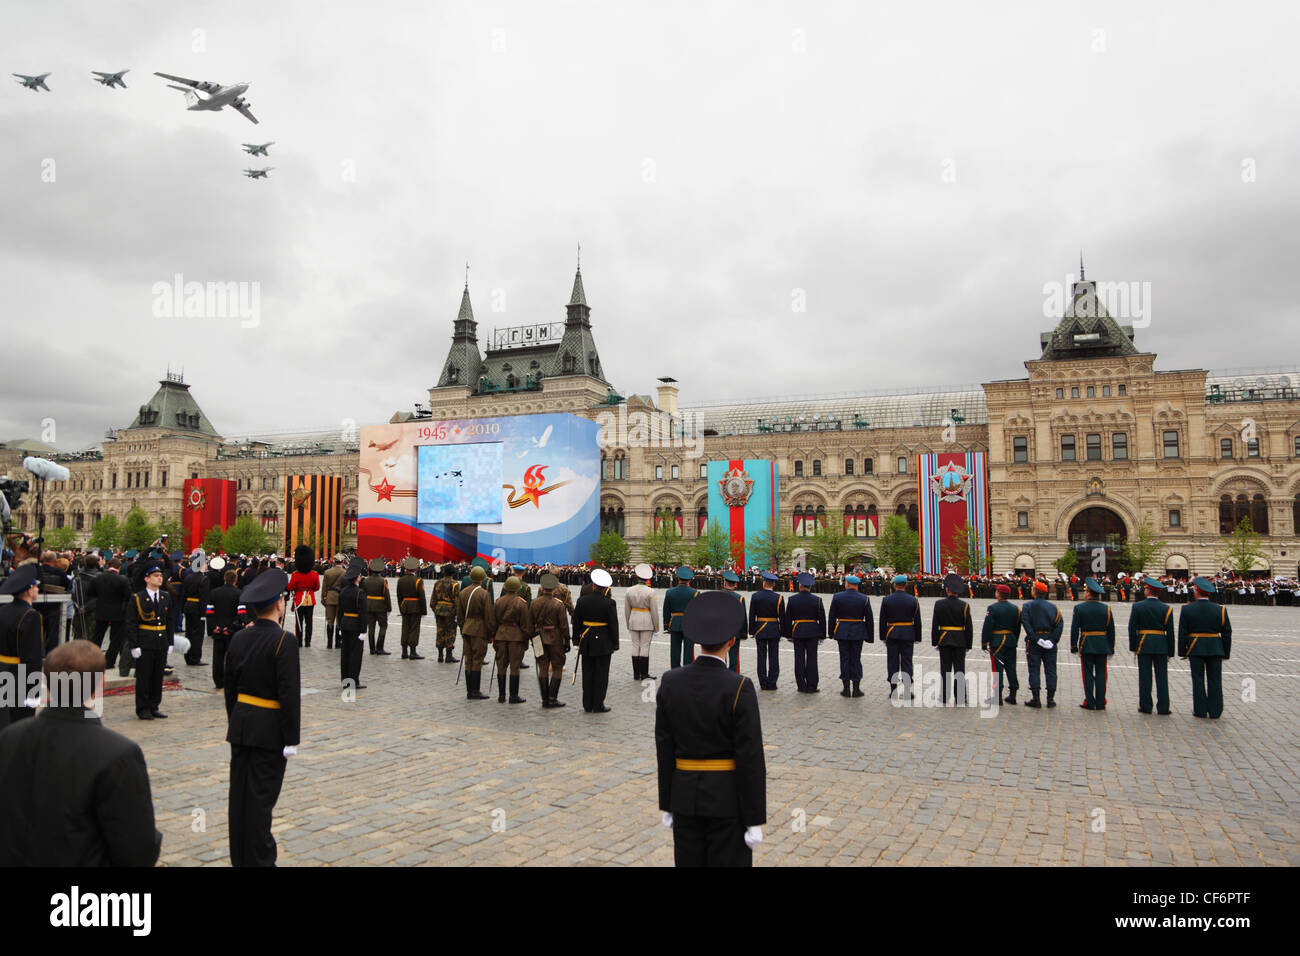 MOSCOW MAY 6 Soldiers participate rehearsal honor Great Patriotic War victory Red Square airplanes fly sky May 6 2010 Moscow Stock Photo